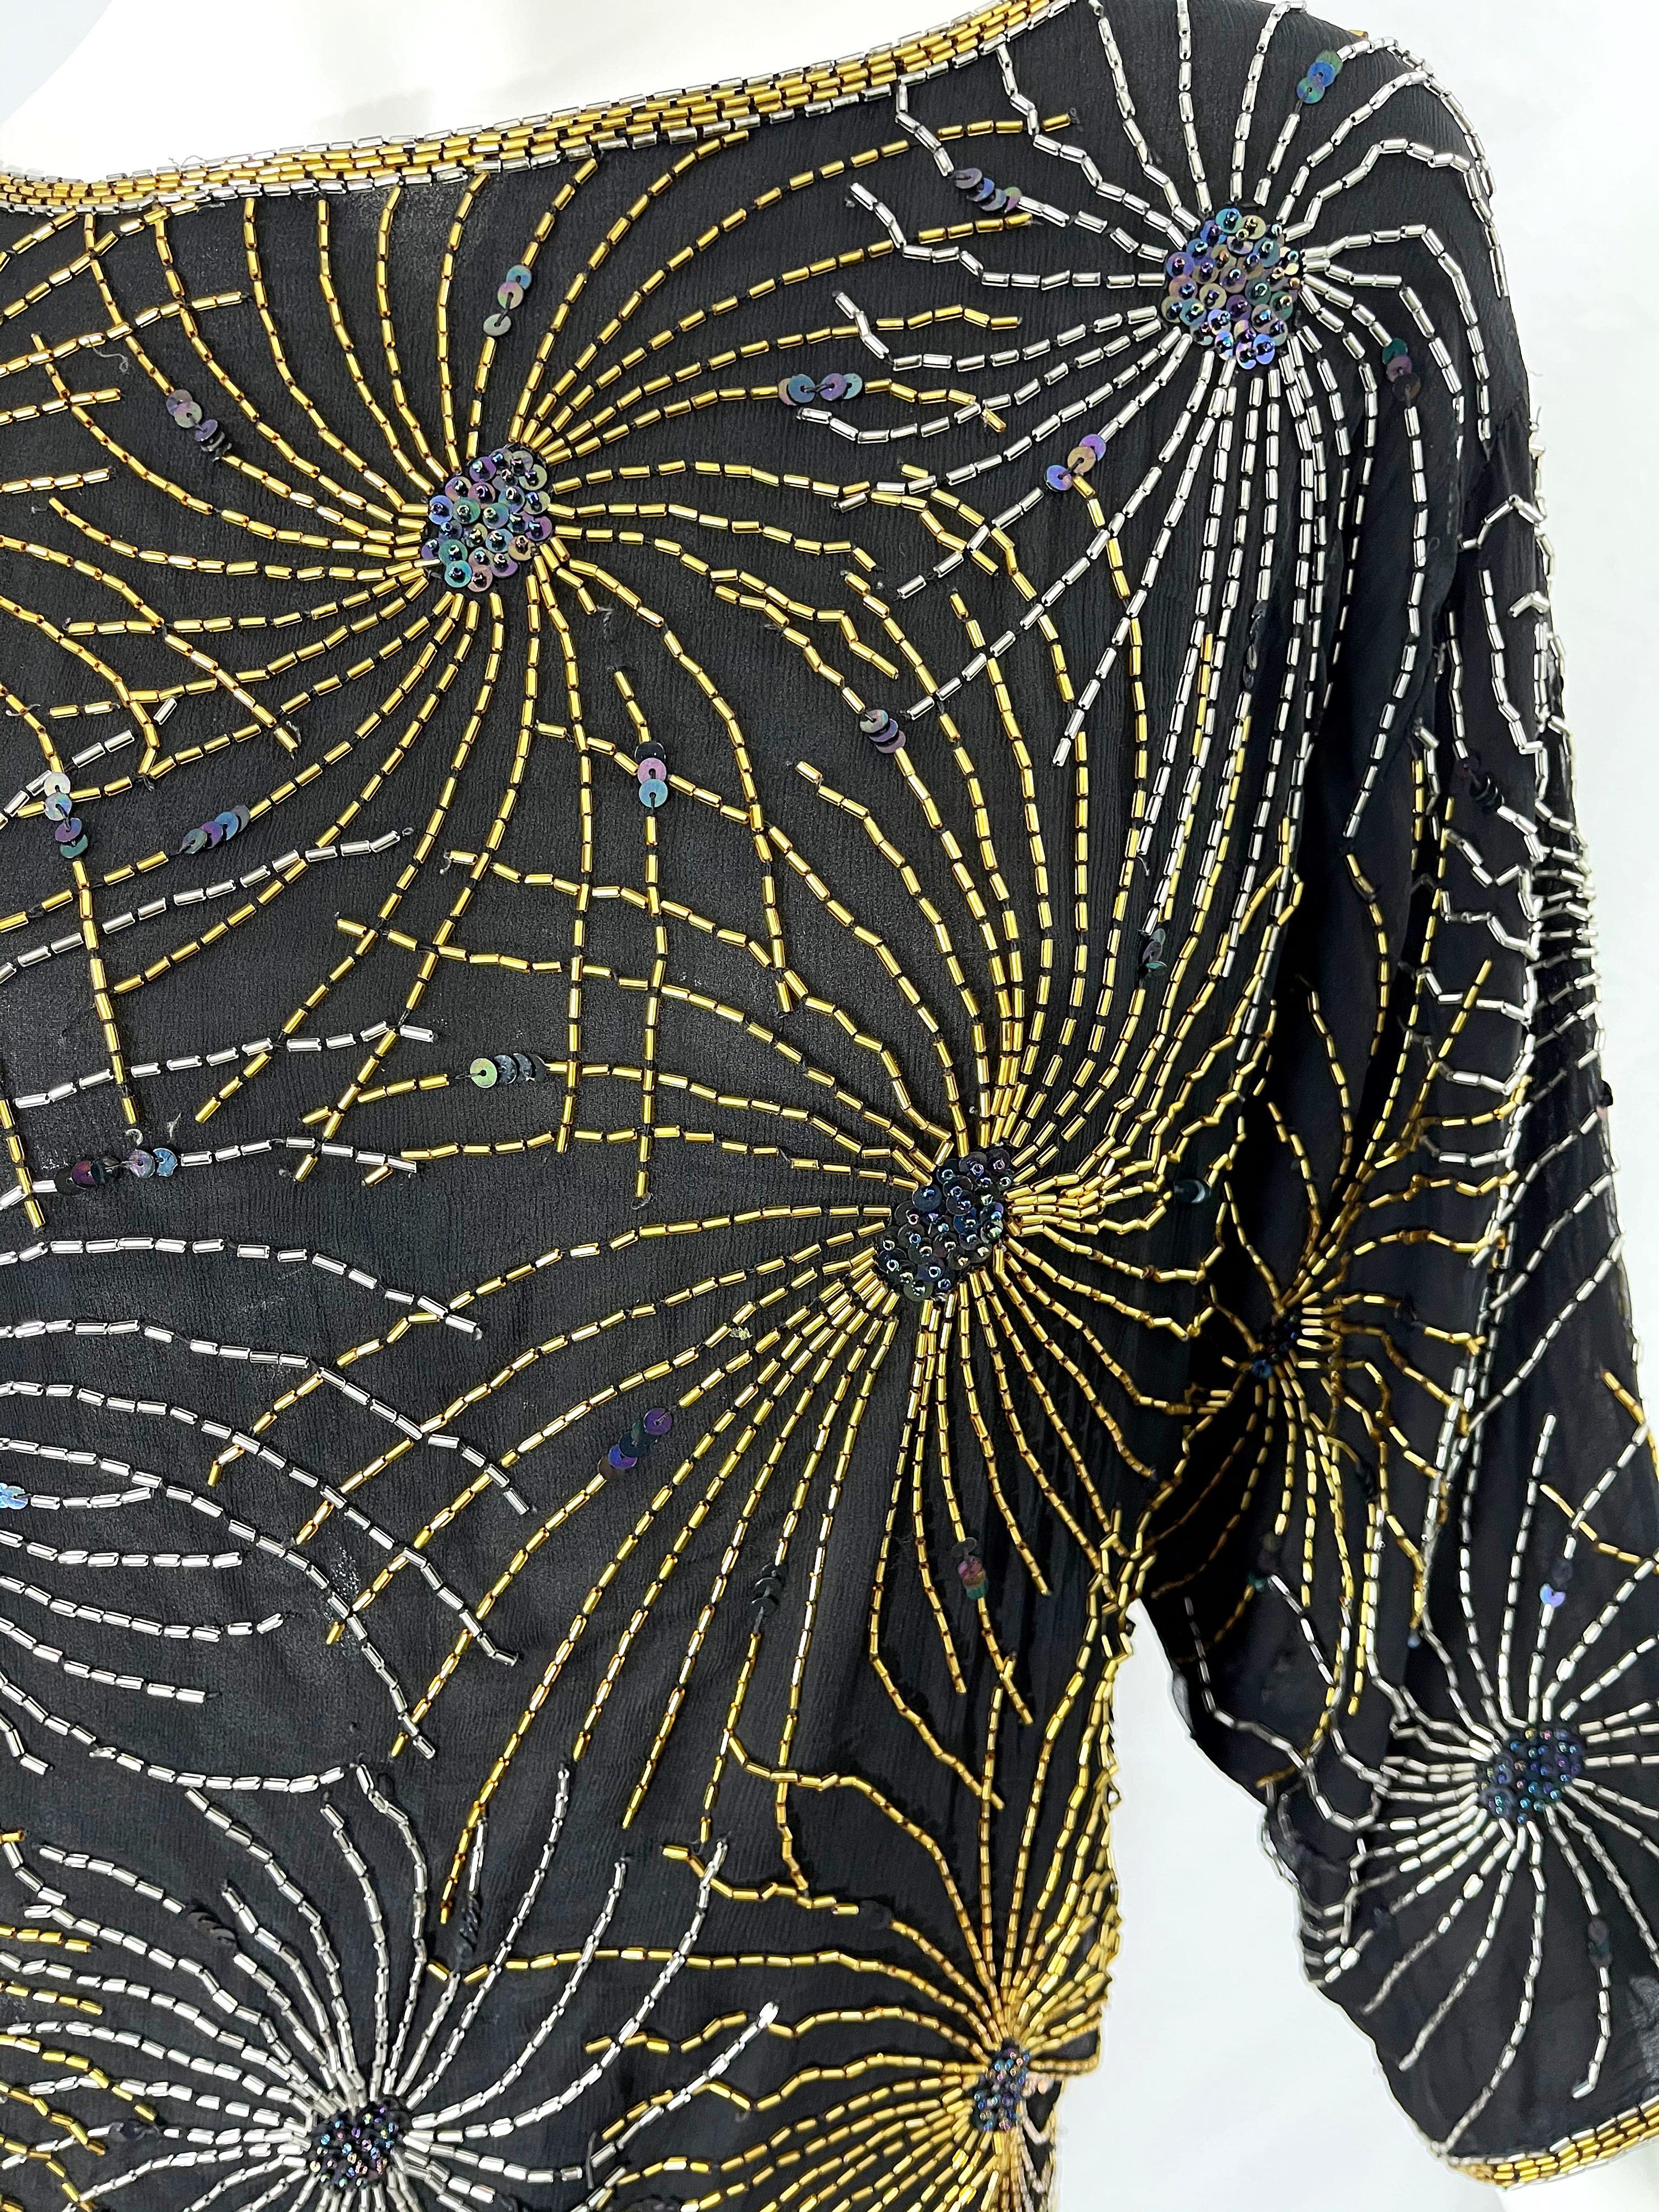 Halston 1970s Iconic Fireworks Beaded Black Silk Chiffon Vintage 70s Blouse Top For Sale 2